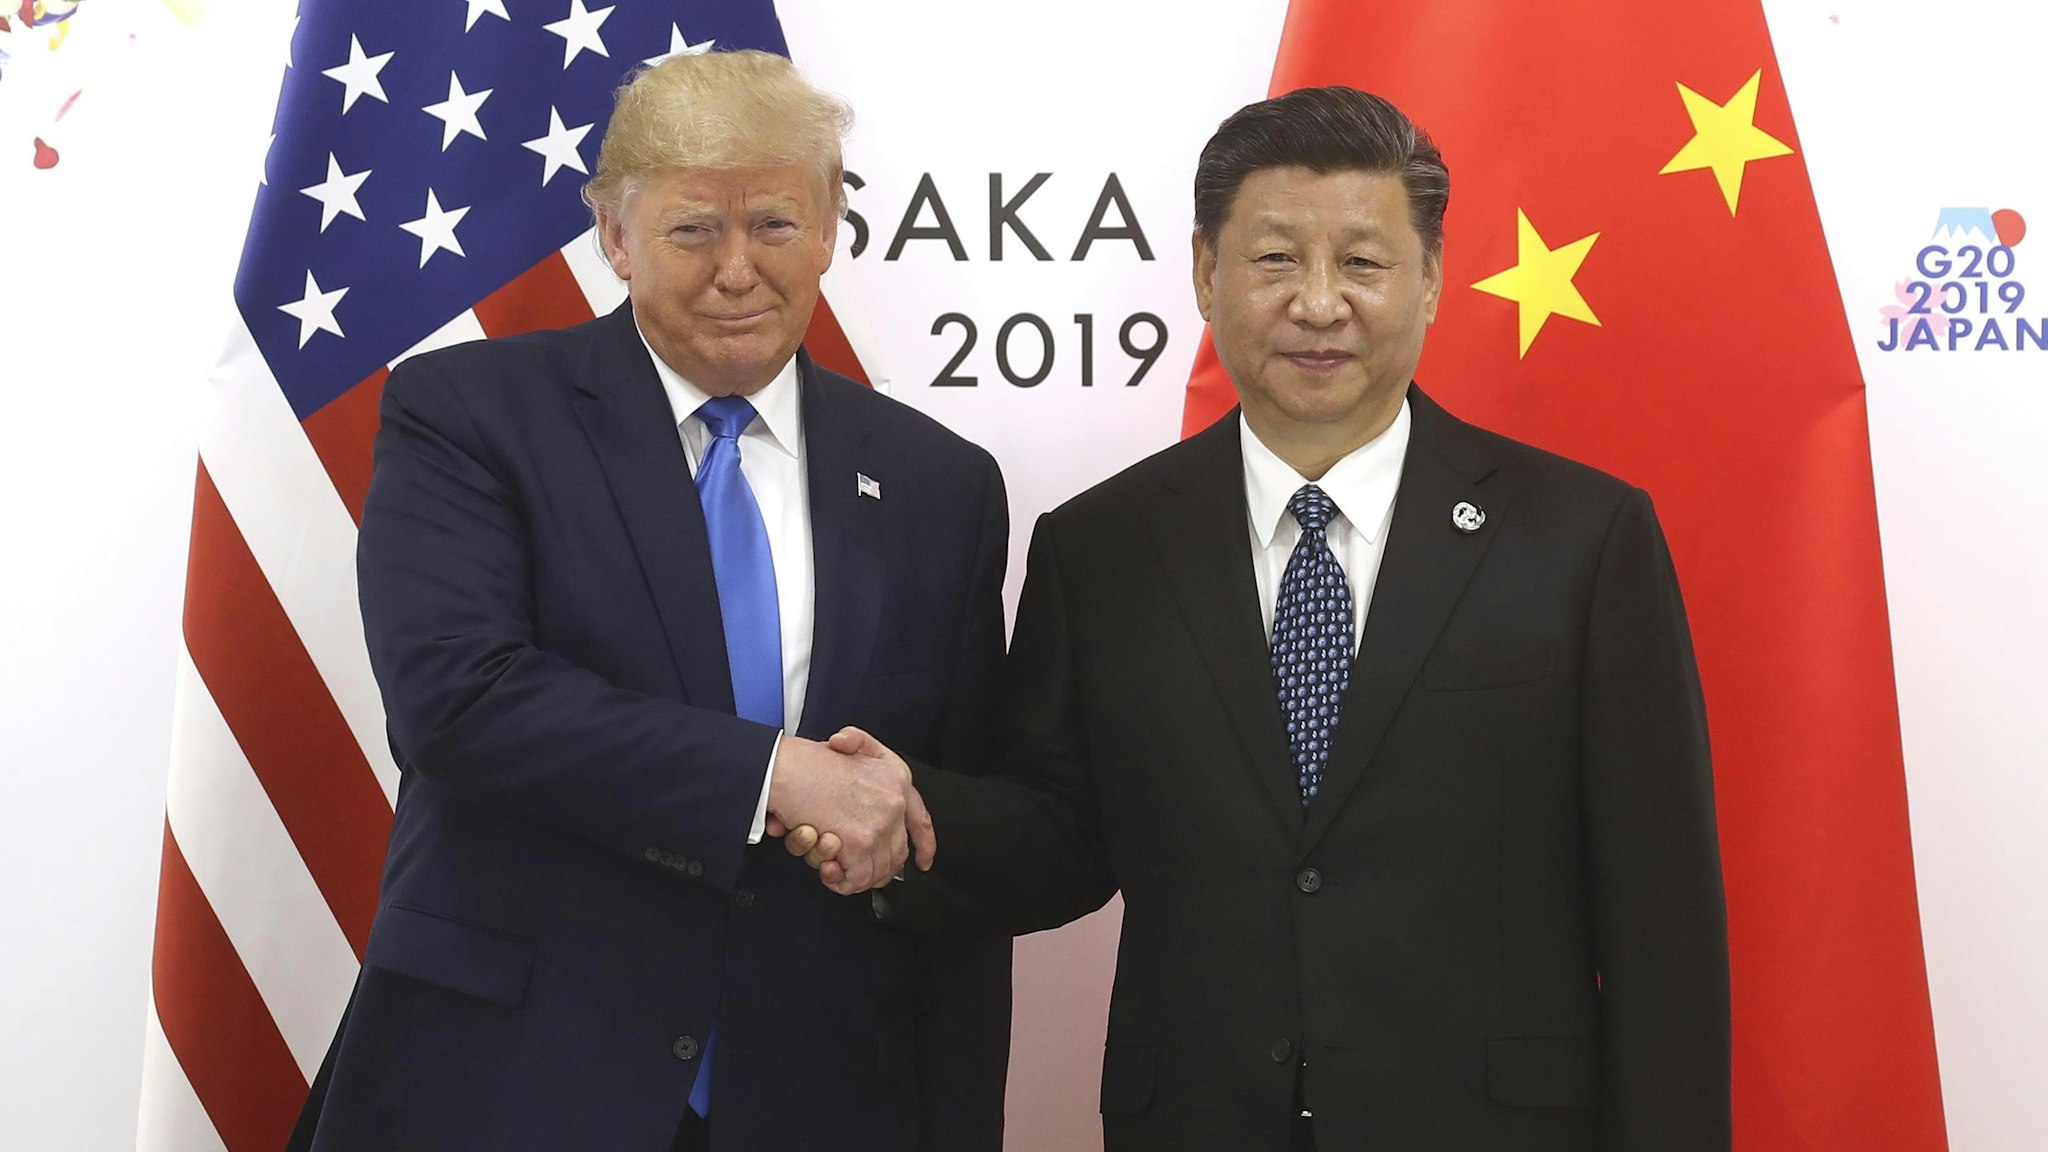 OSAKA, JAPAN - JUNE 29: Chinese President Xi Jinping (R) shakes hands with US President Donald Trump before a bilateral meeting during the G20 Summit on June 29, 2019 in Osaka, Japan.